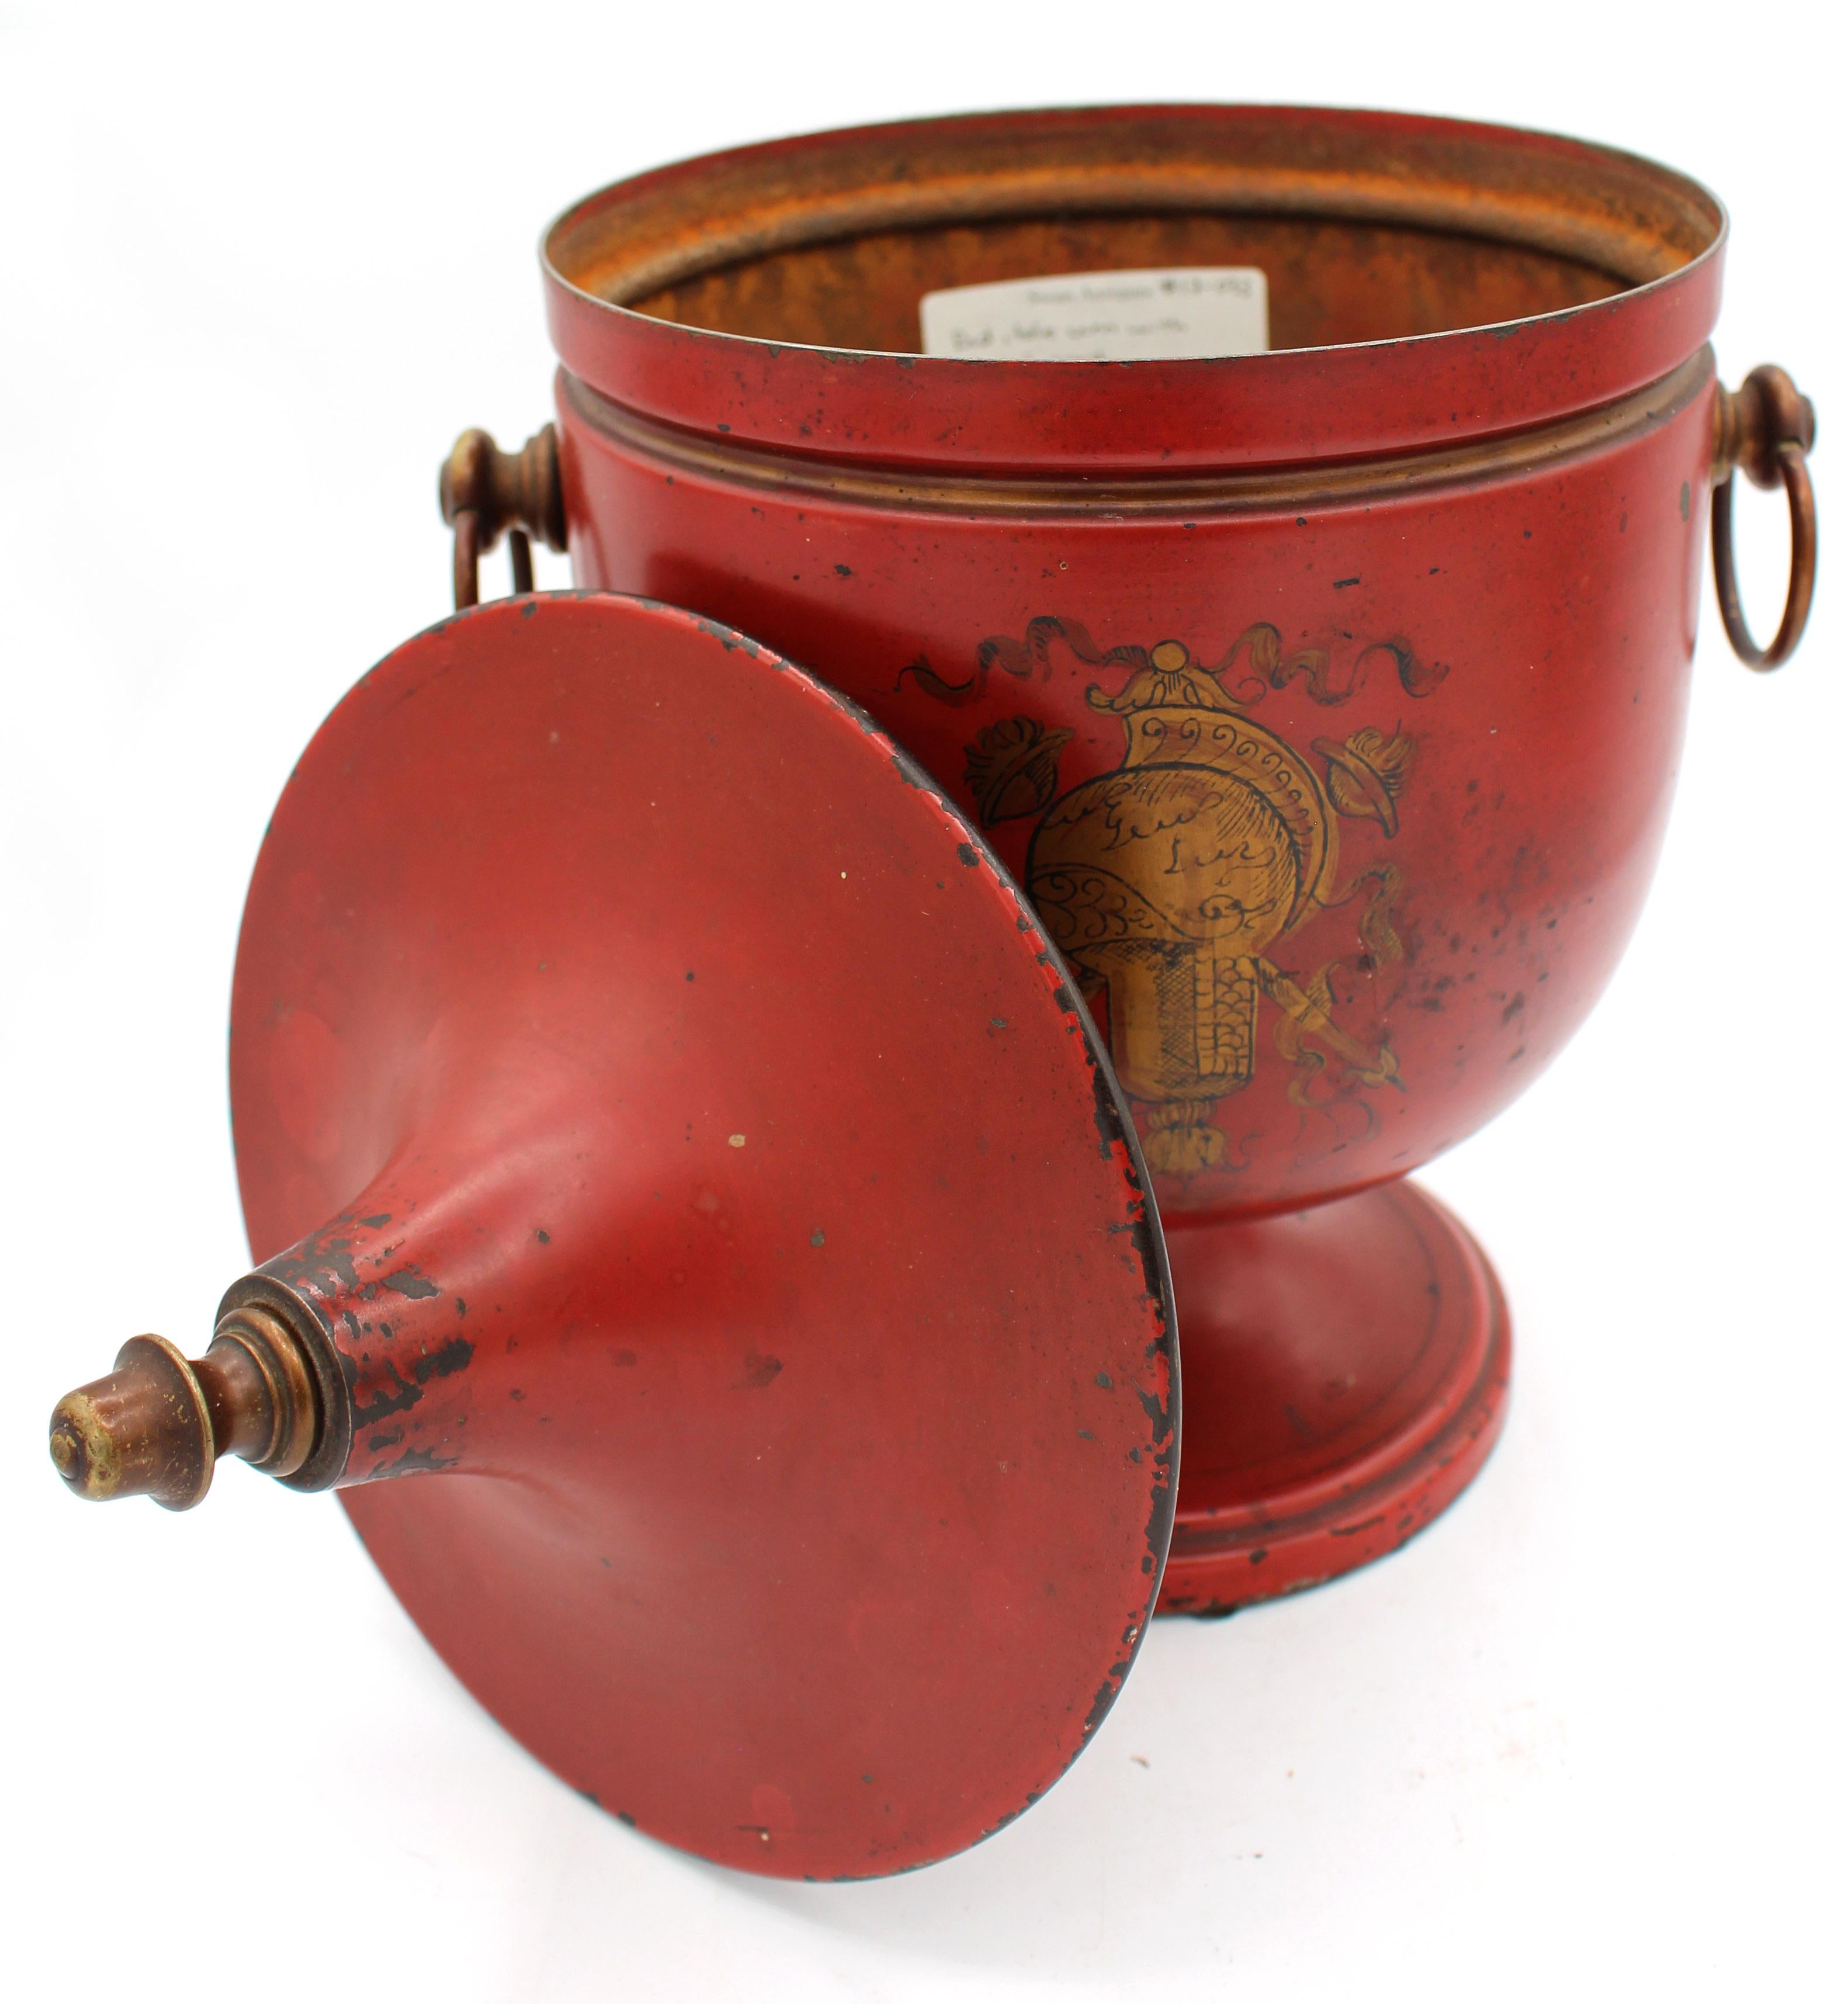 Circa 1880s French scarlet & gilt tole covered urn. Handsome Classical form with trophy decoration. Bronze finished brass fittings. Provenance: Georgia collection from Swan Antiques, Atlanta, GA (label inside priced at $1,175). Overall wear